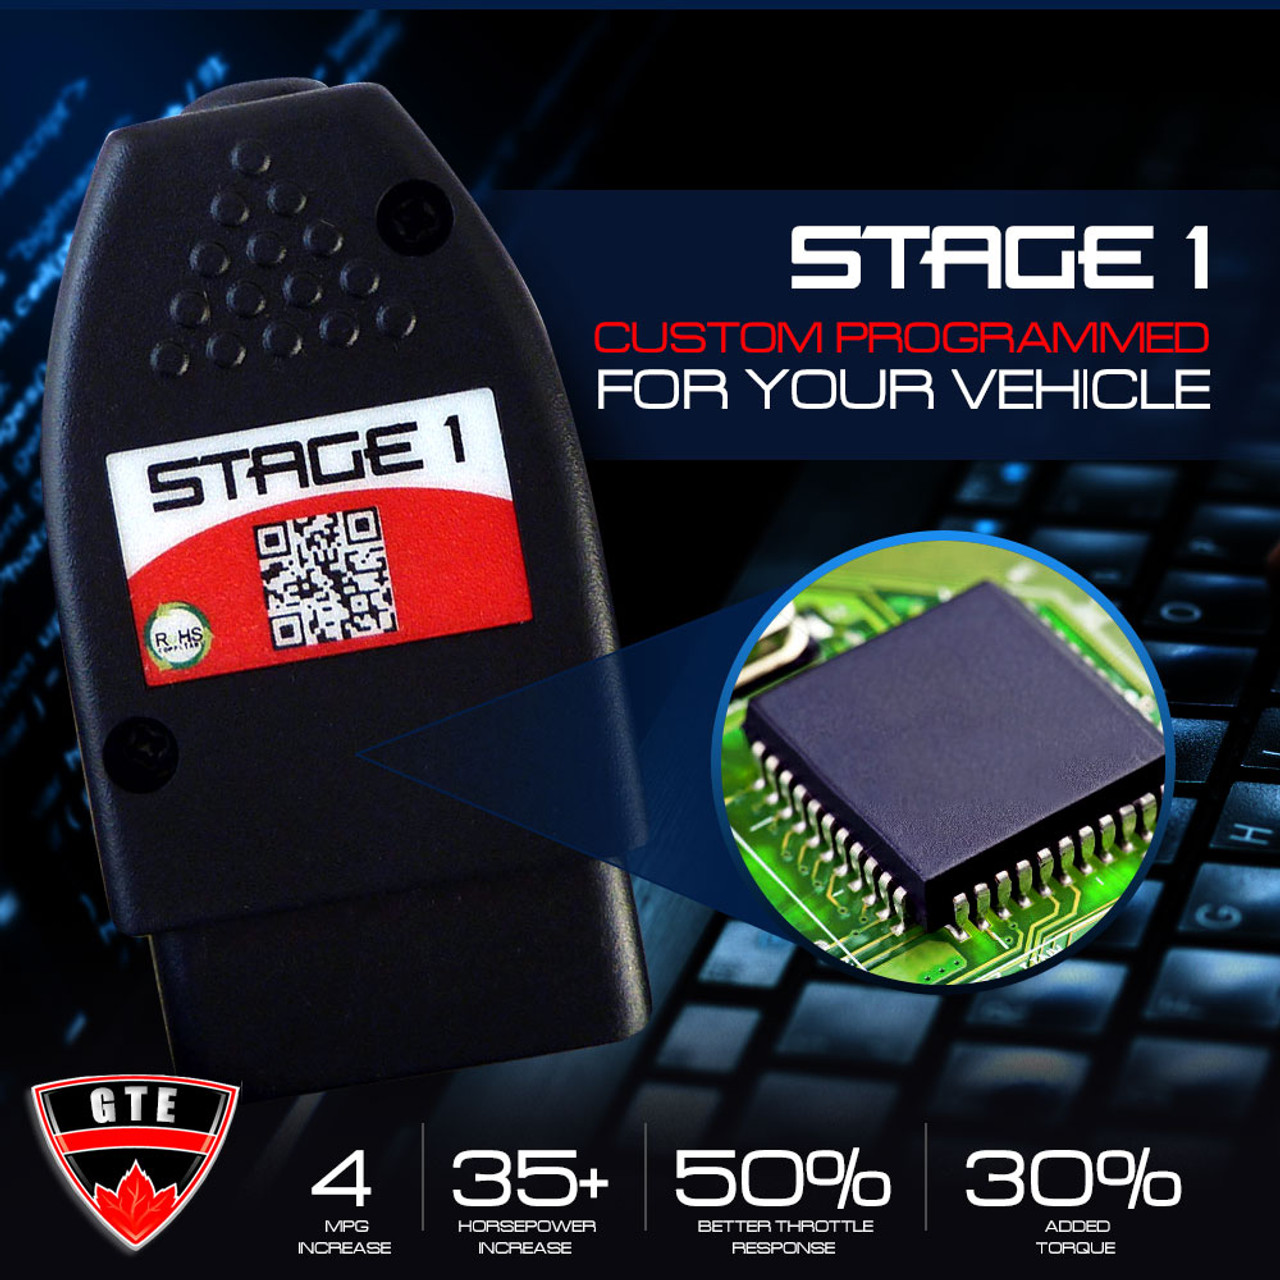 Performance Tuning Tuner Speed OBDII OBD2 OBD II 2 Chip Module for Dodge 2010-19 